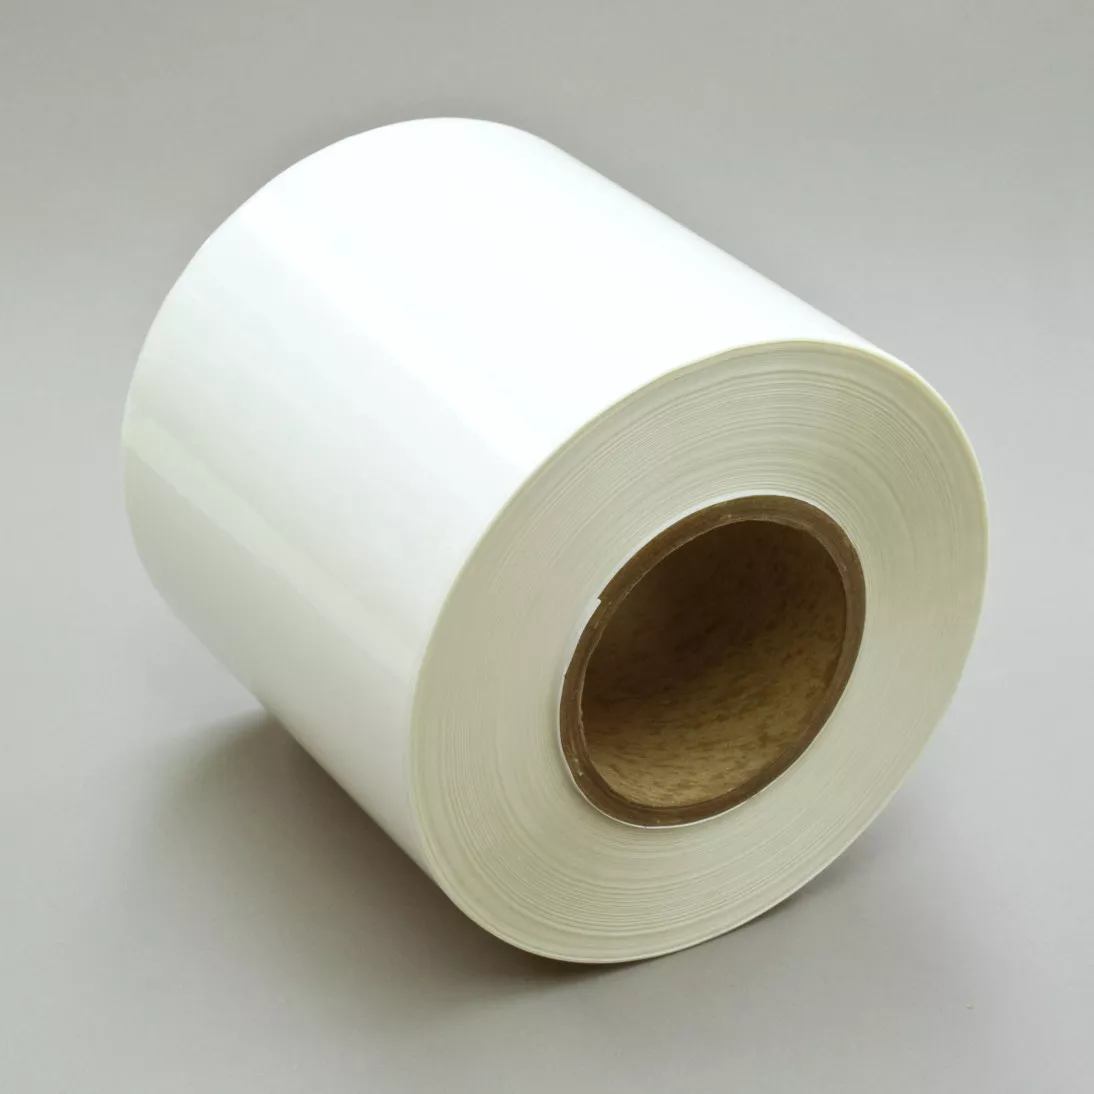 3M™ Overlaminate Label Material 7745FL, Matte Clear Polyester, 6 in x
1668 ft, 1 roll per case